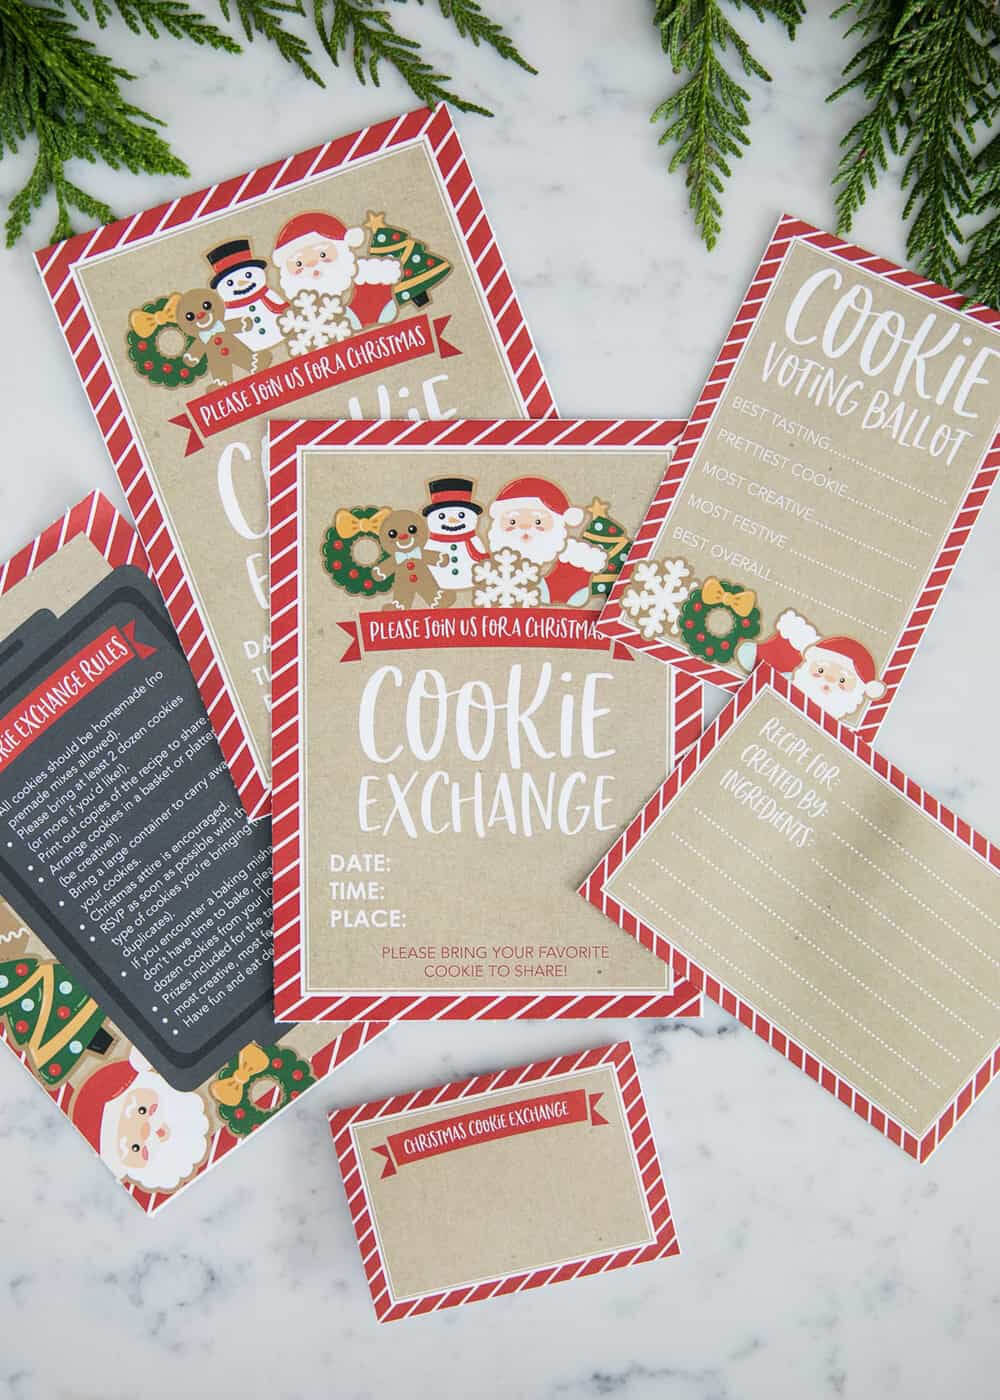 How To Host A Cookie Exchange (W/ Free Printables!) – I Within Cookie Exchange Recipe Card Template